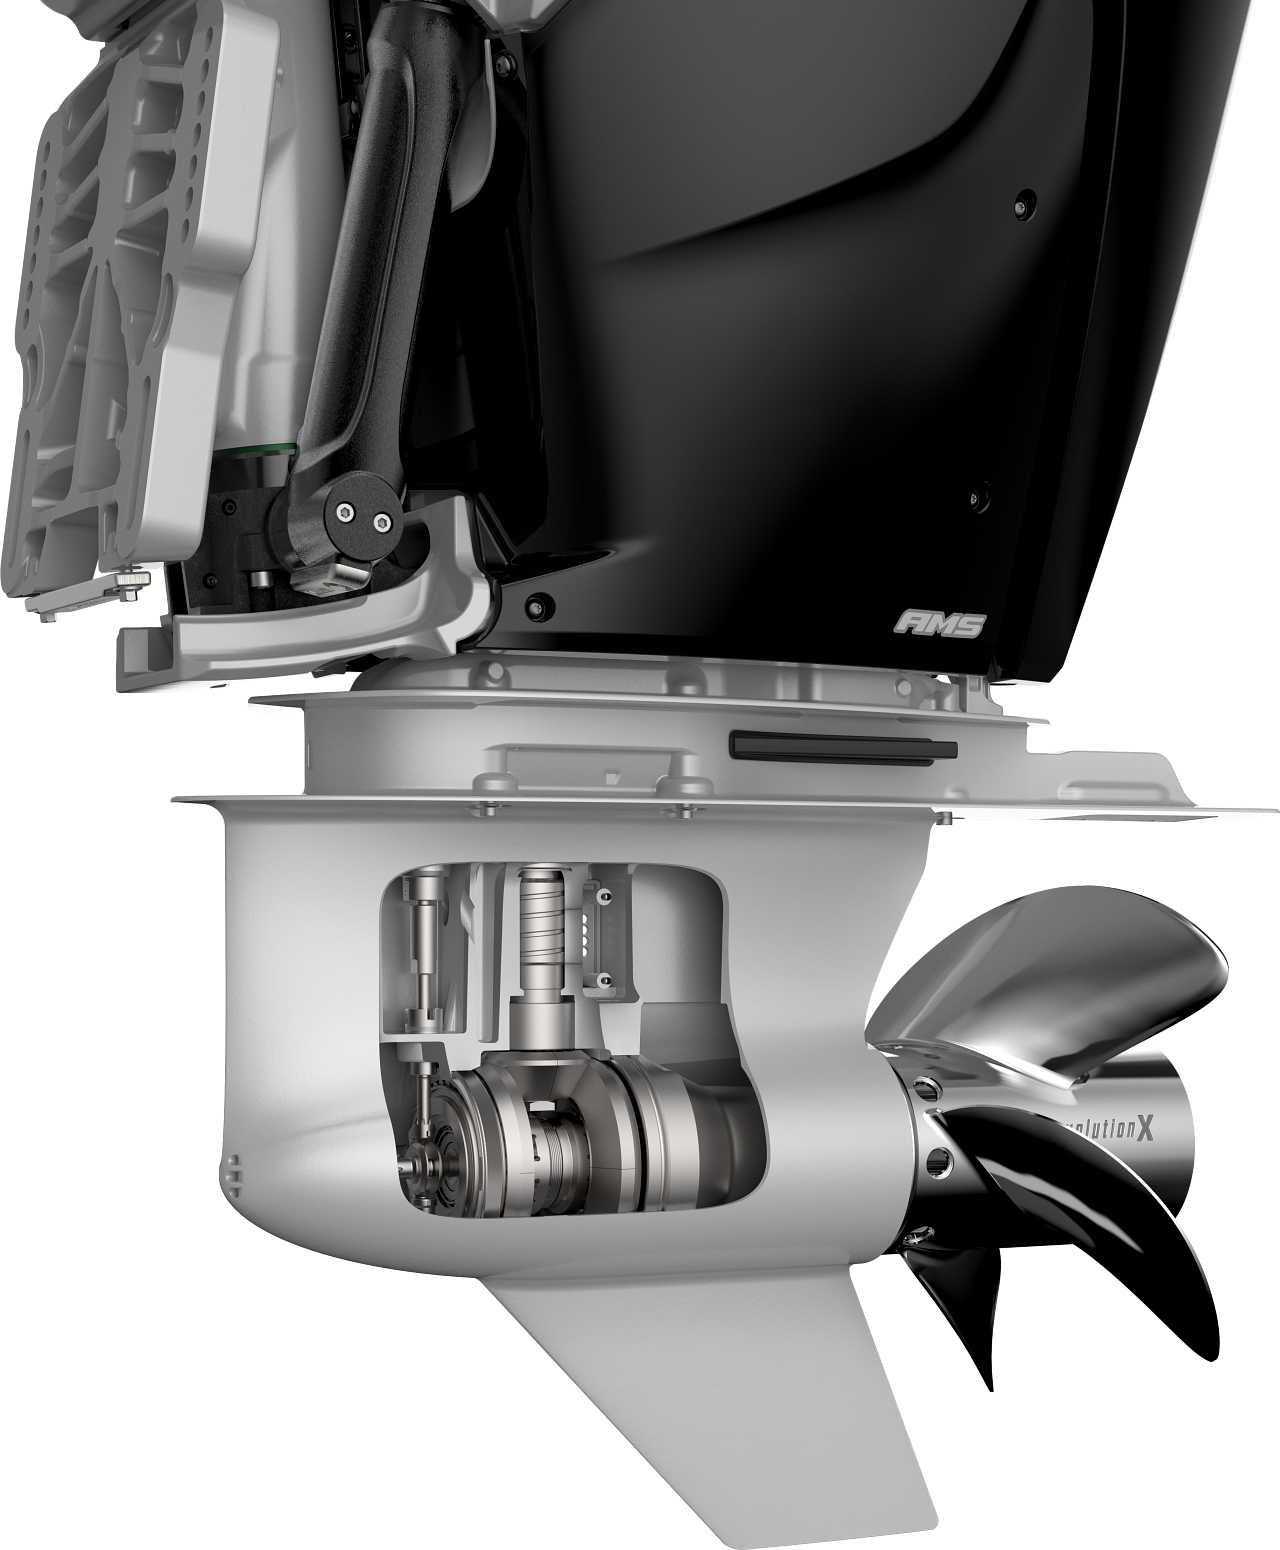 Mercury Marine Launches V10 Outboard Platform | Center Console Life ...